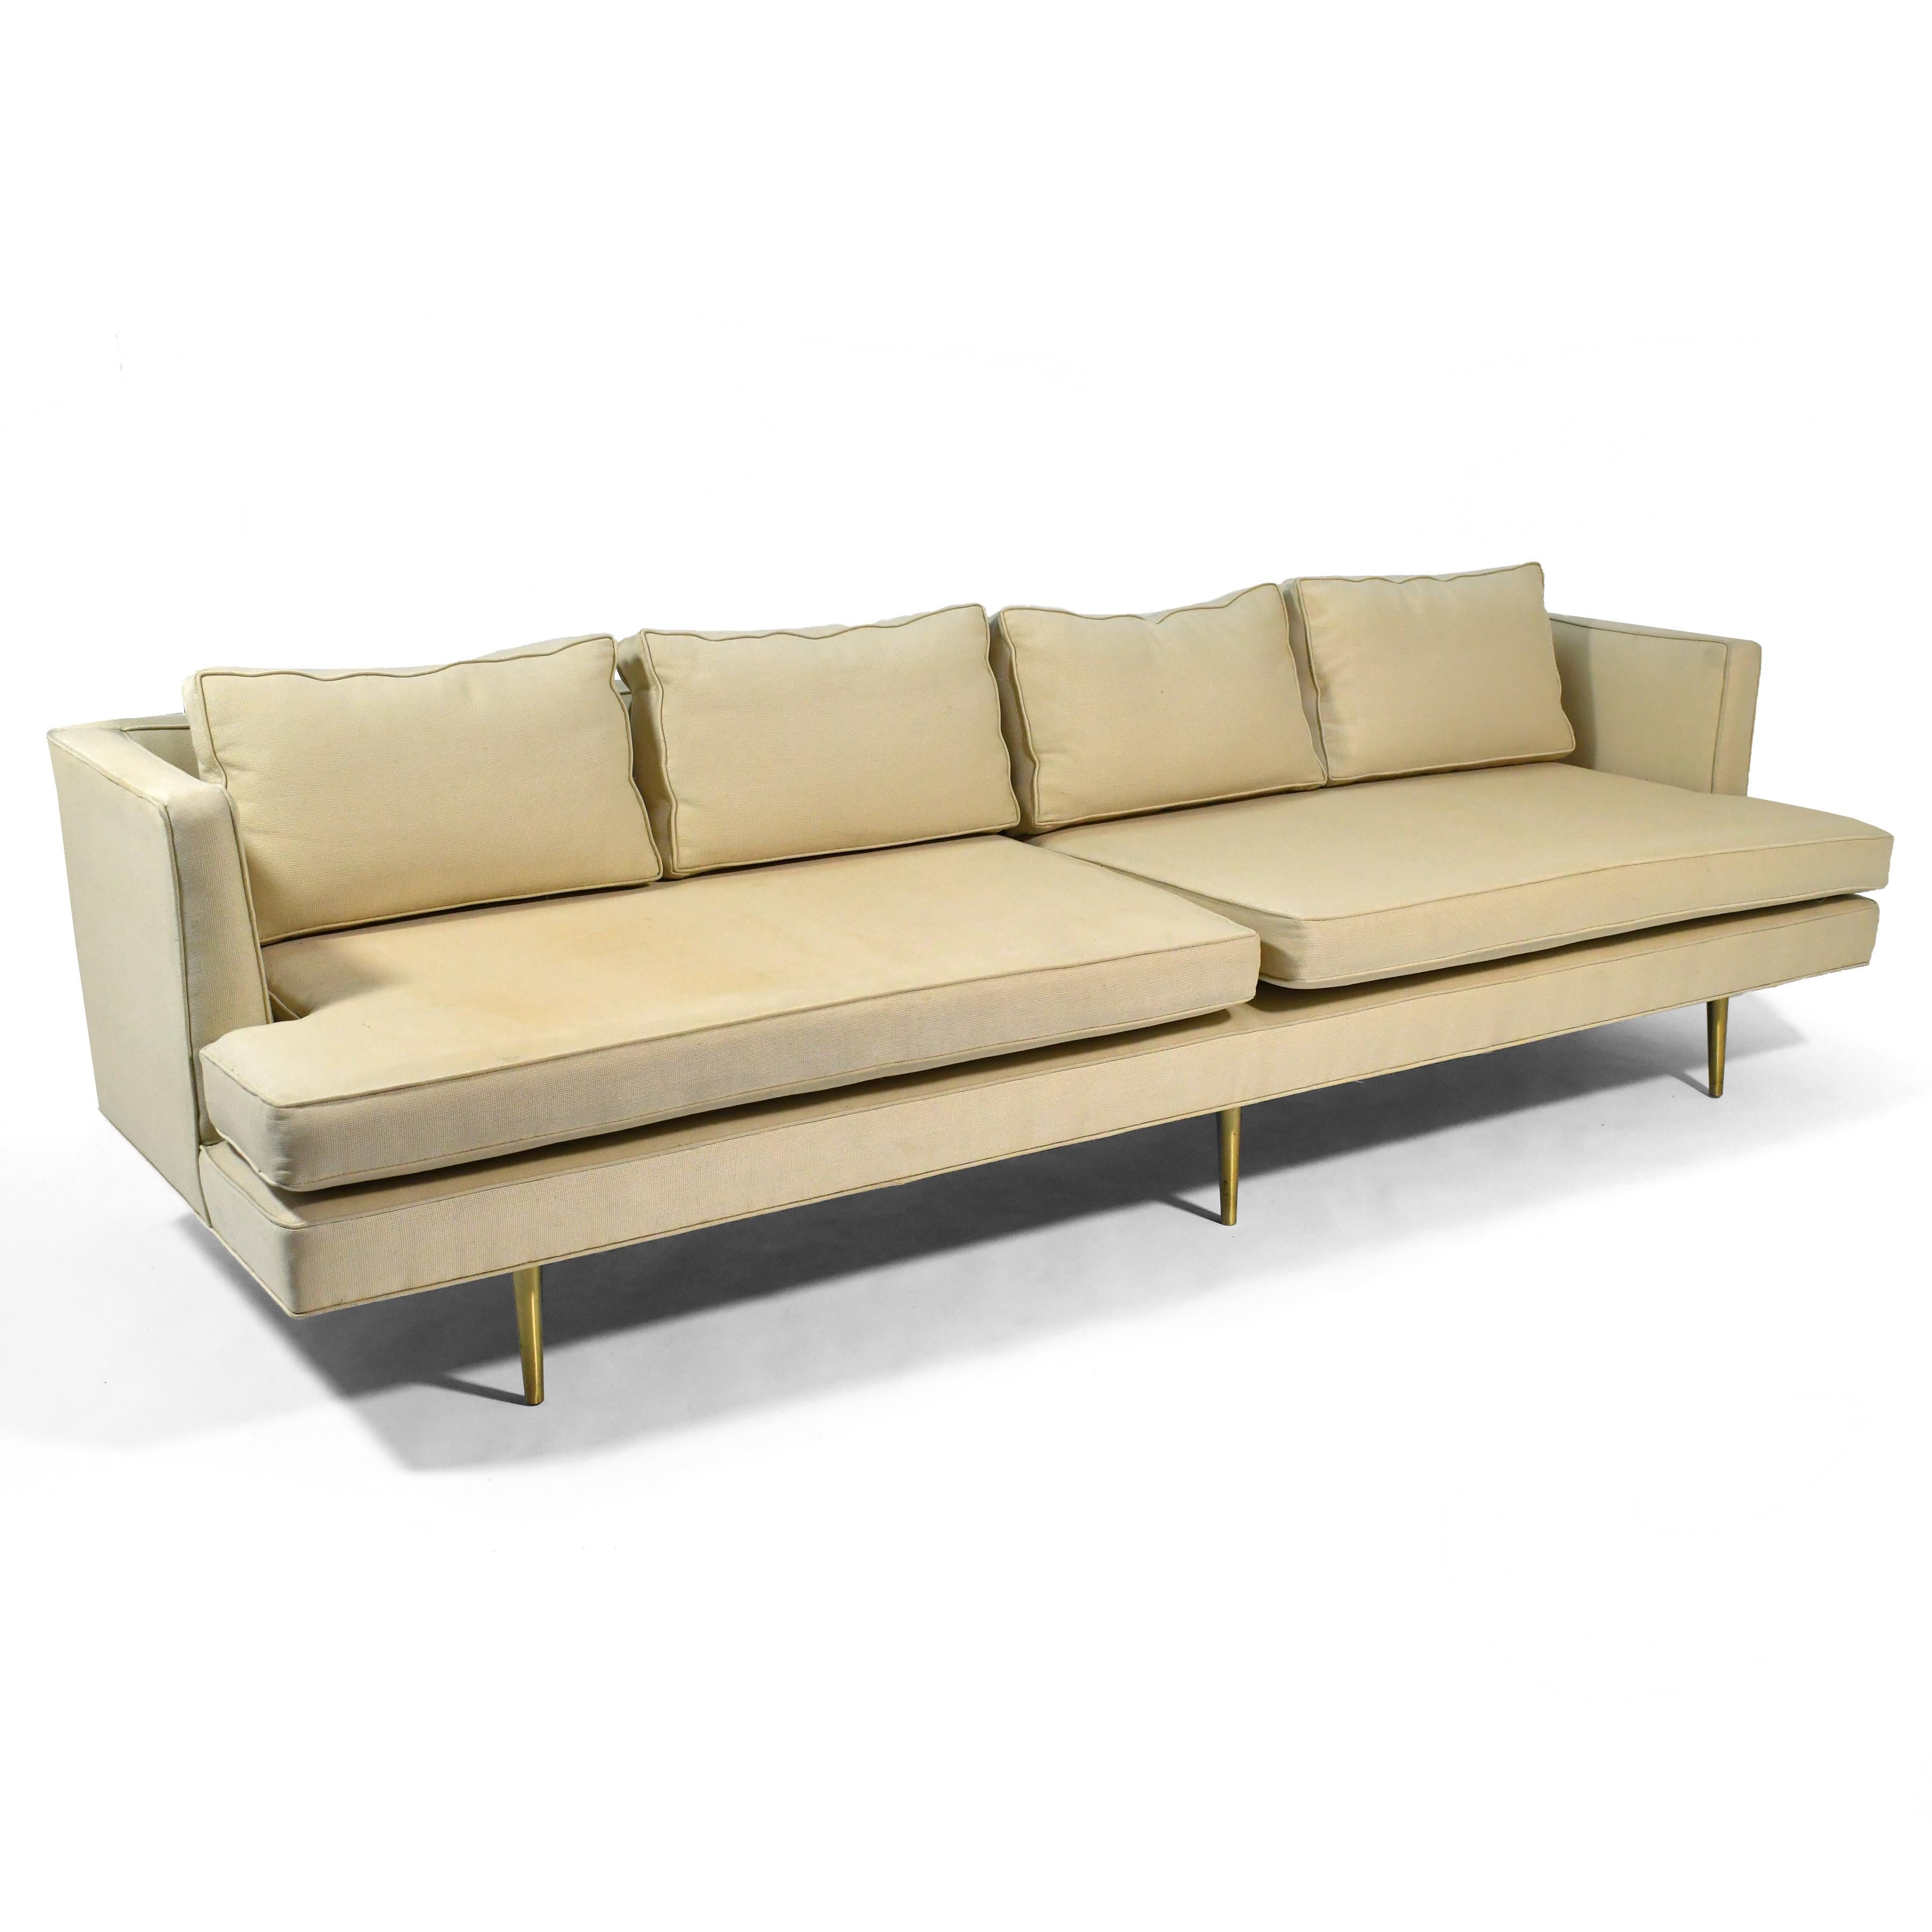 n our opinion, this Ed Wormely design for Dunbar is one of the most spectacular sofas ever made. Modern, classic, and timeless... this form transcends styles, genres and eras. Nine feet of upholstered seating with loose cushions and 3/4 arms sits